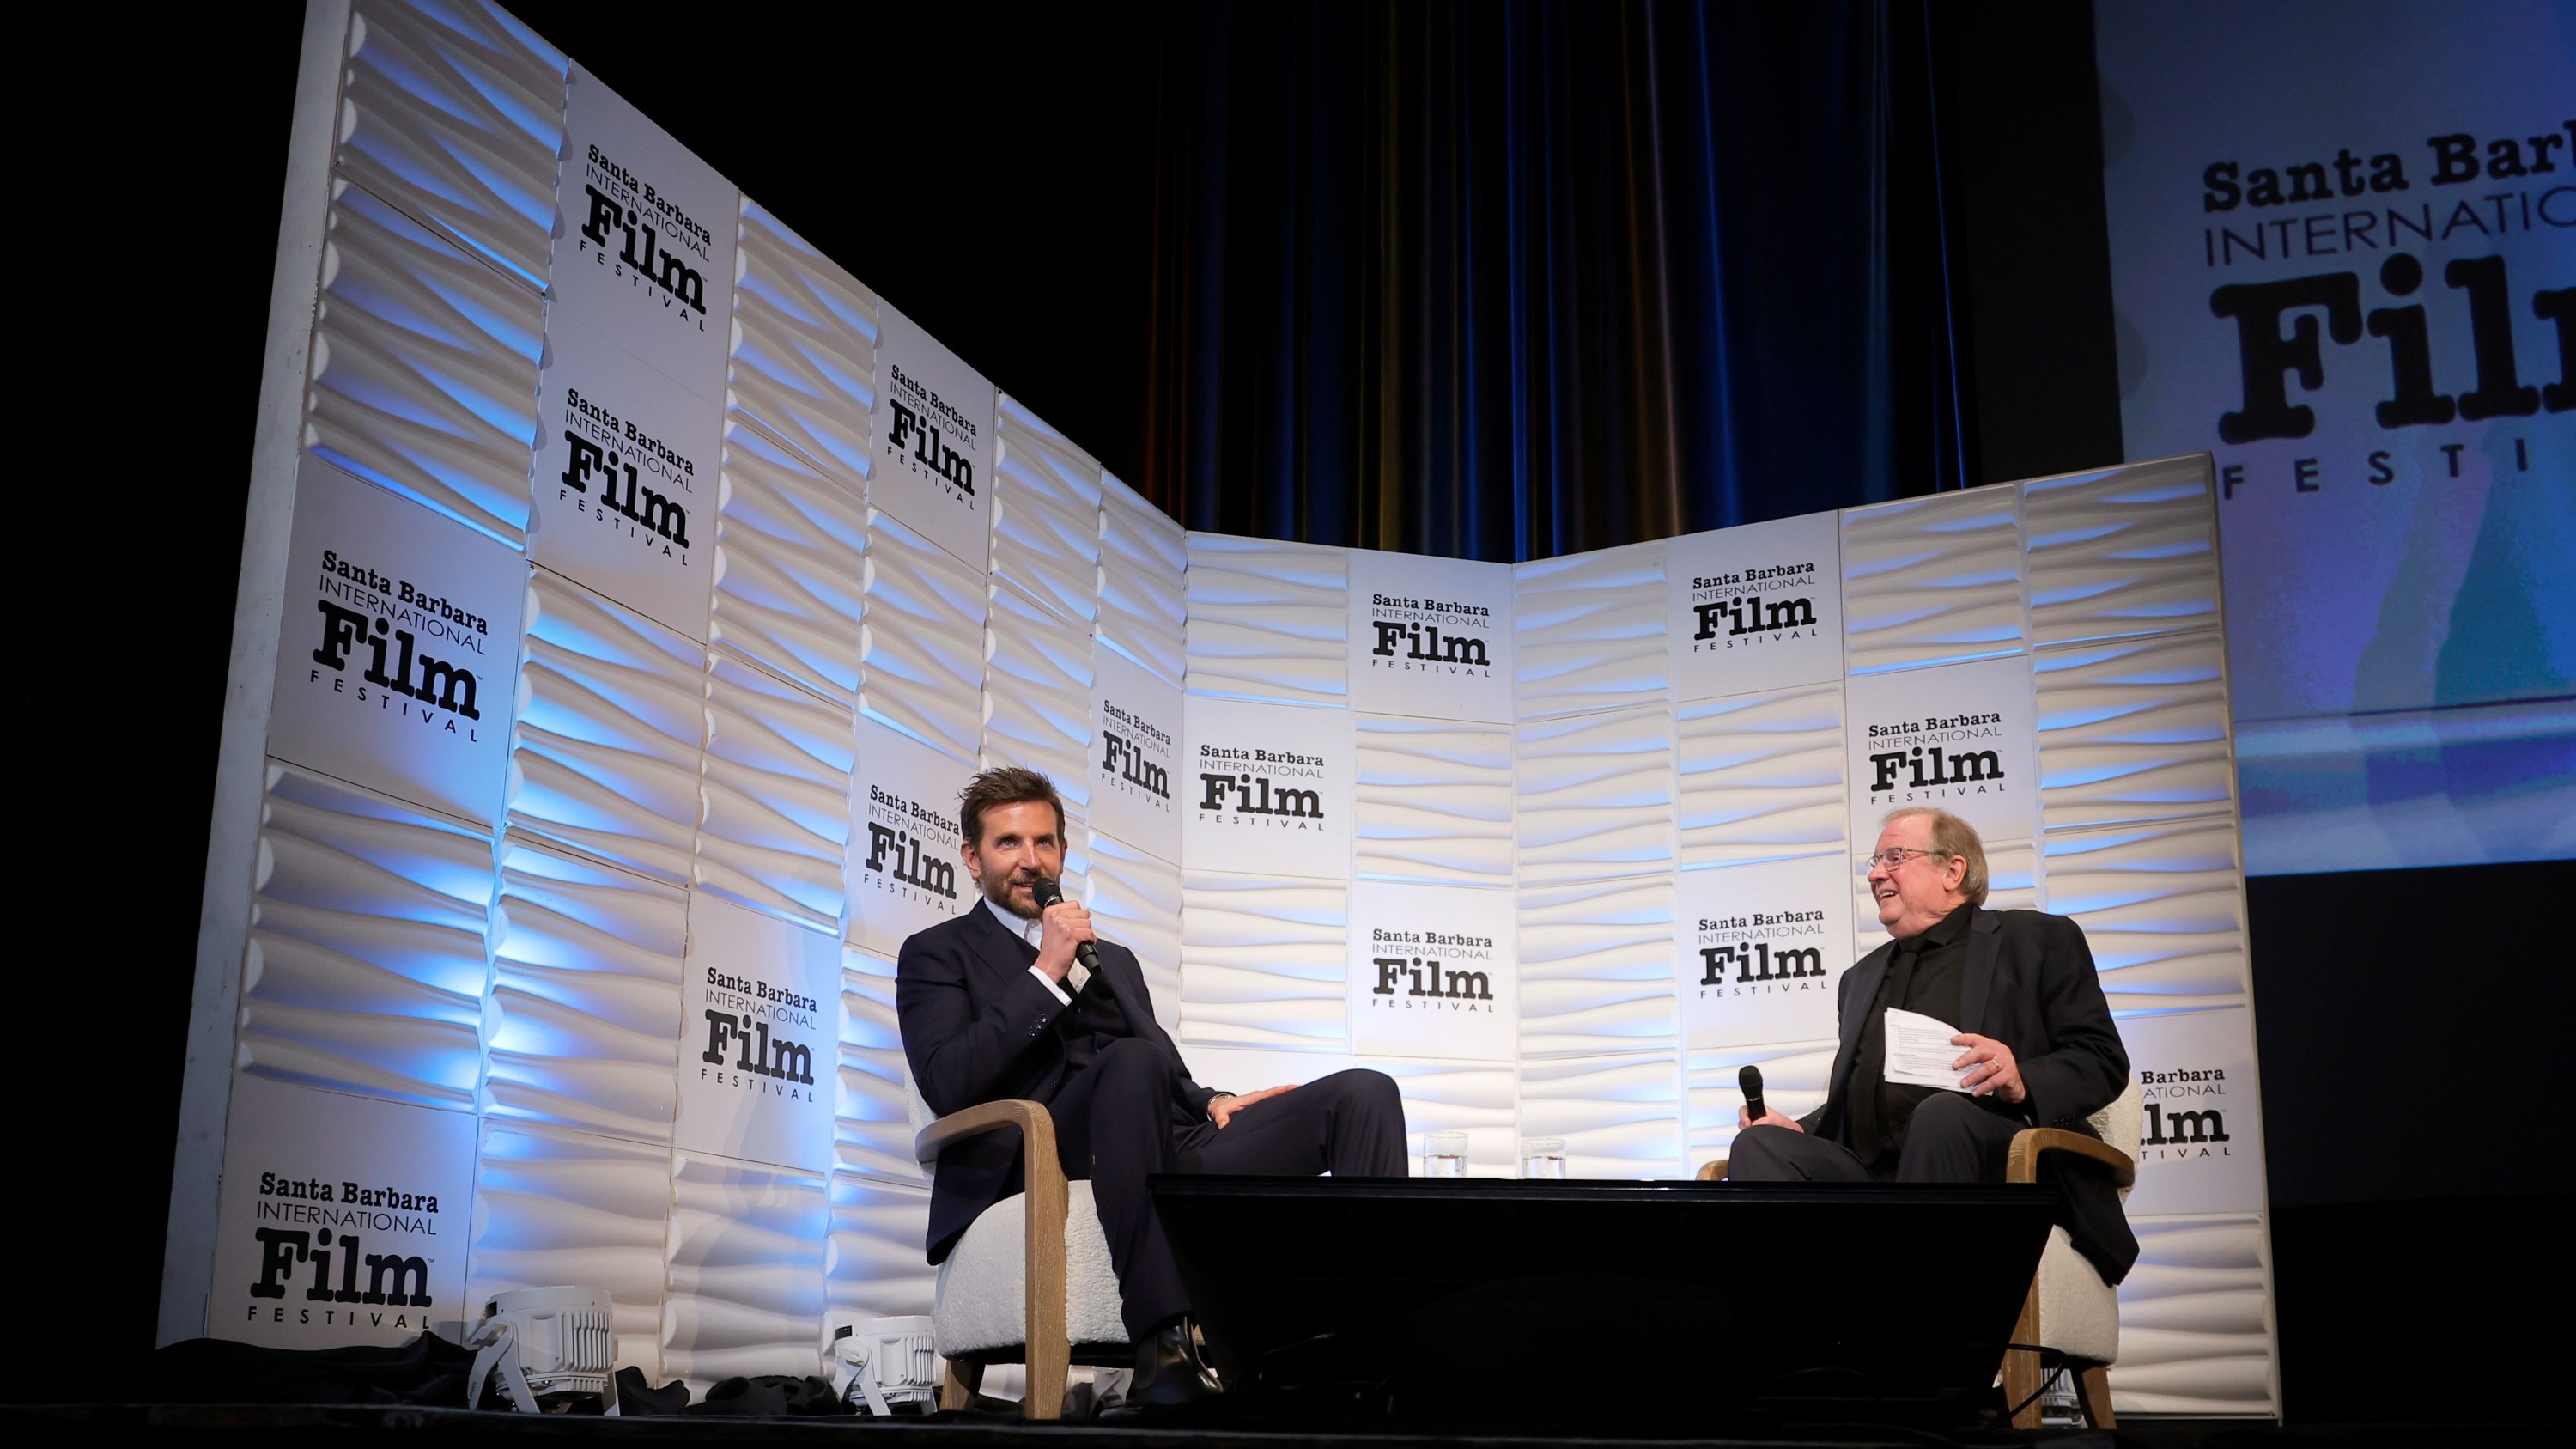 SANTA BARBARA, CALIFORNIA - FEBRUARY 08: Bradley Cooper and Pete Hammond speak onstage at the Outstanding Performer of the Year Award ceremony during the 39th Annual Santa Barbara International Film Festival at The Arlington Theatre on February 08, 2024 in Santa Barbara, California. (Photo by Tibrina Hobson/Getty Images for SBIFF)